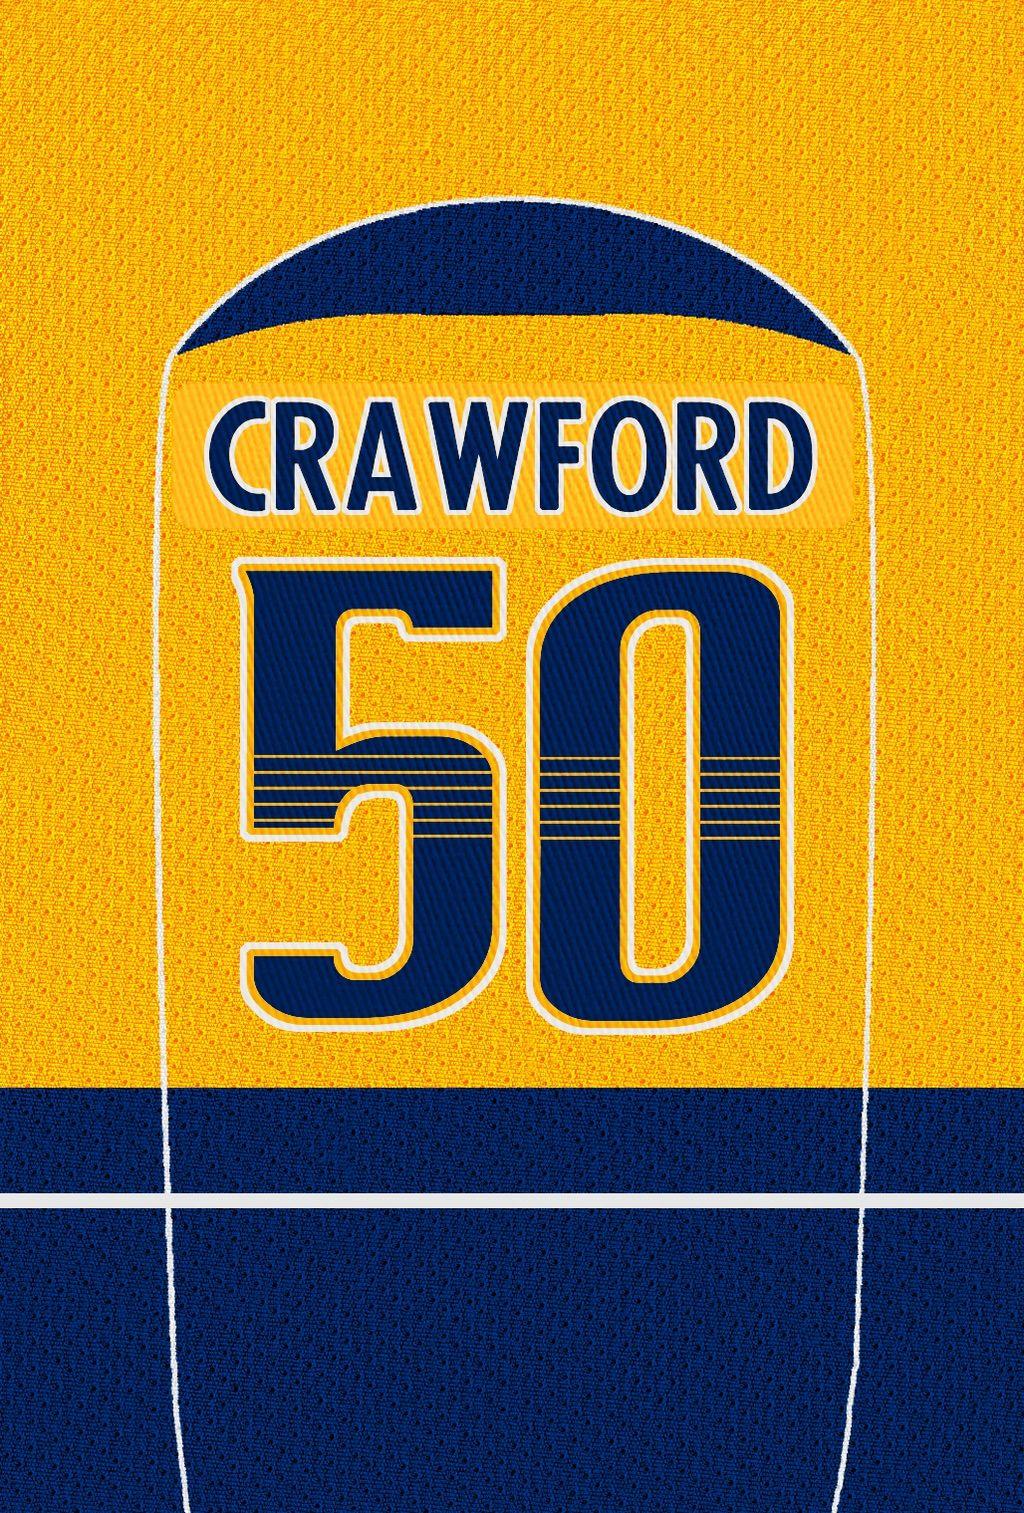 Asked a friend on Twitter for a Preds Jersey phone wallpaper